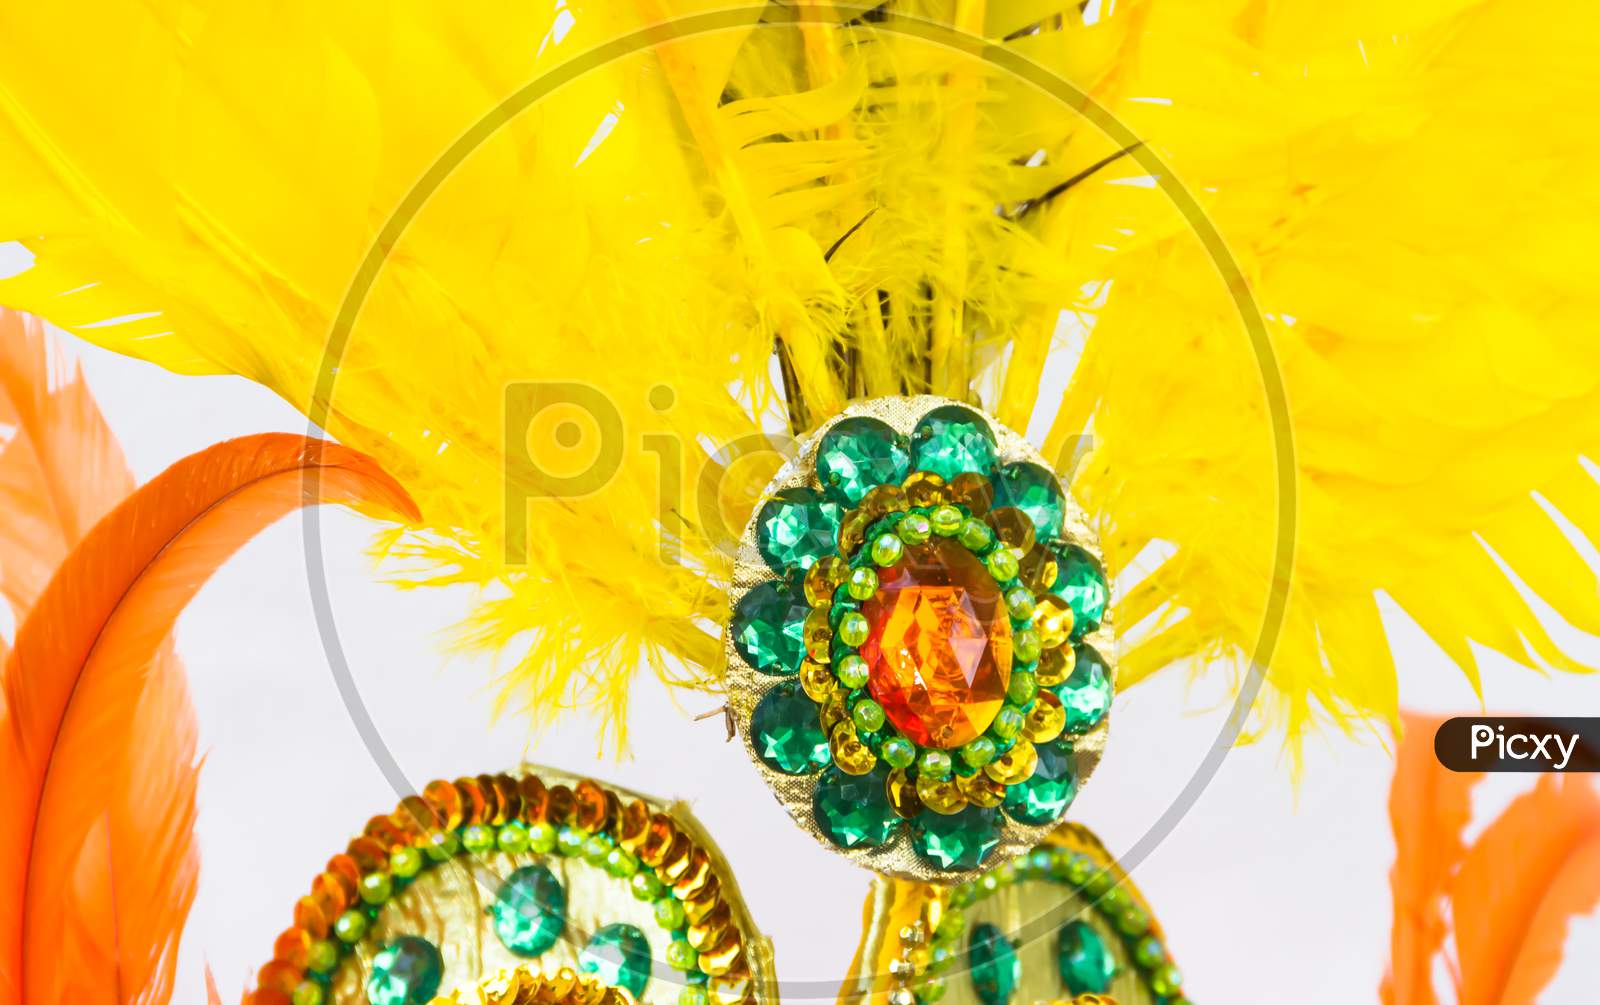 Helmet Decorated With Bright Stones And Feathers For Carnival